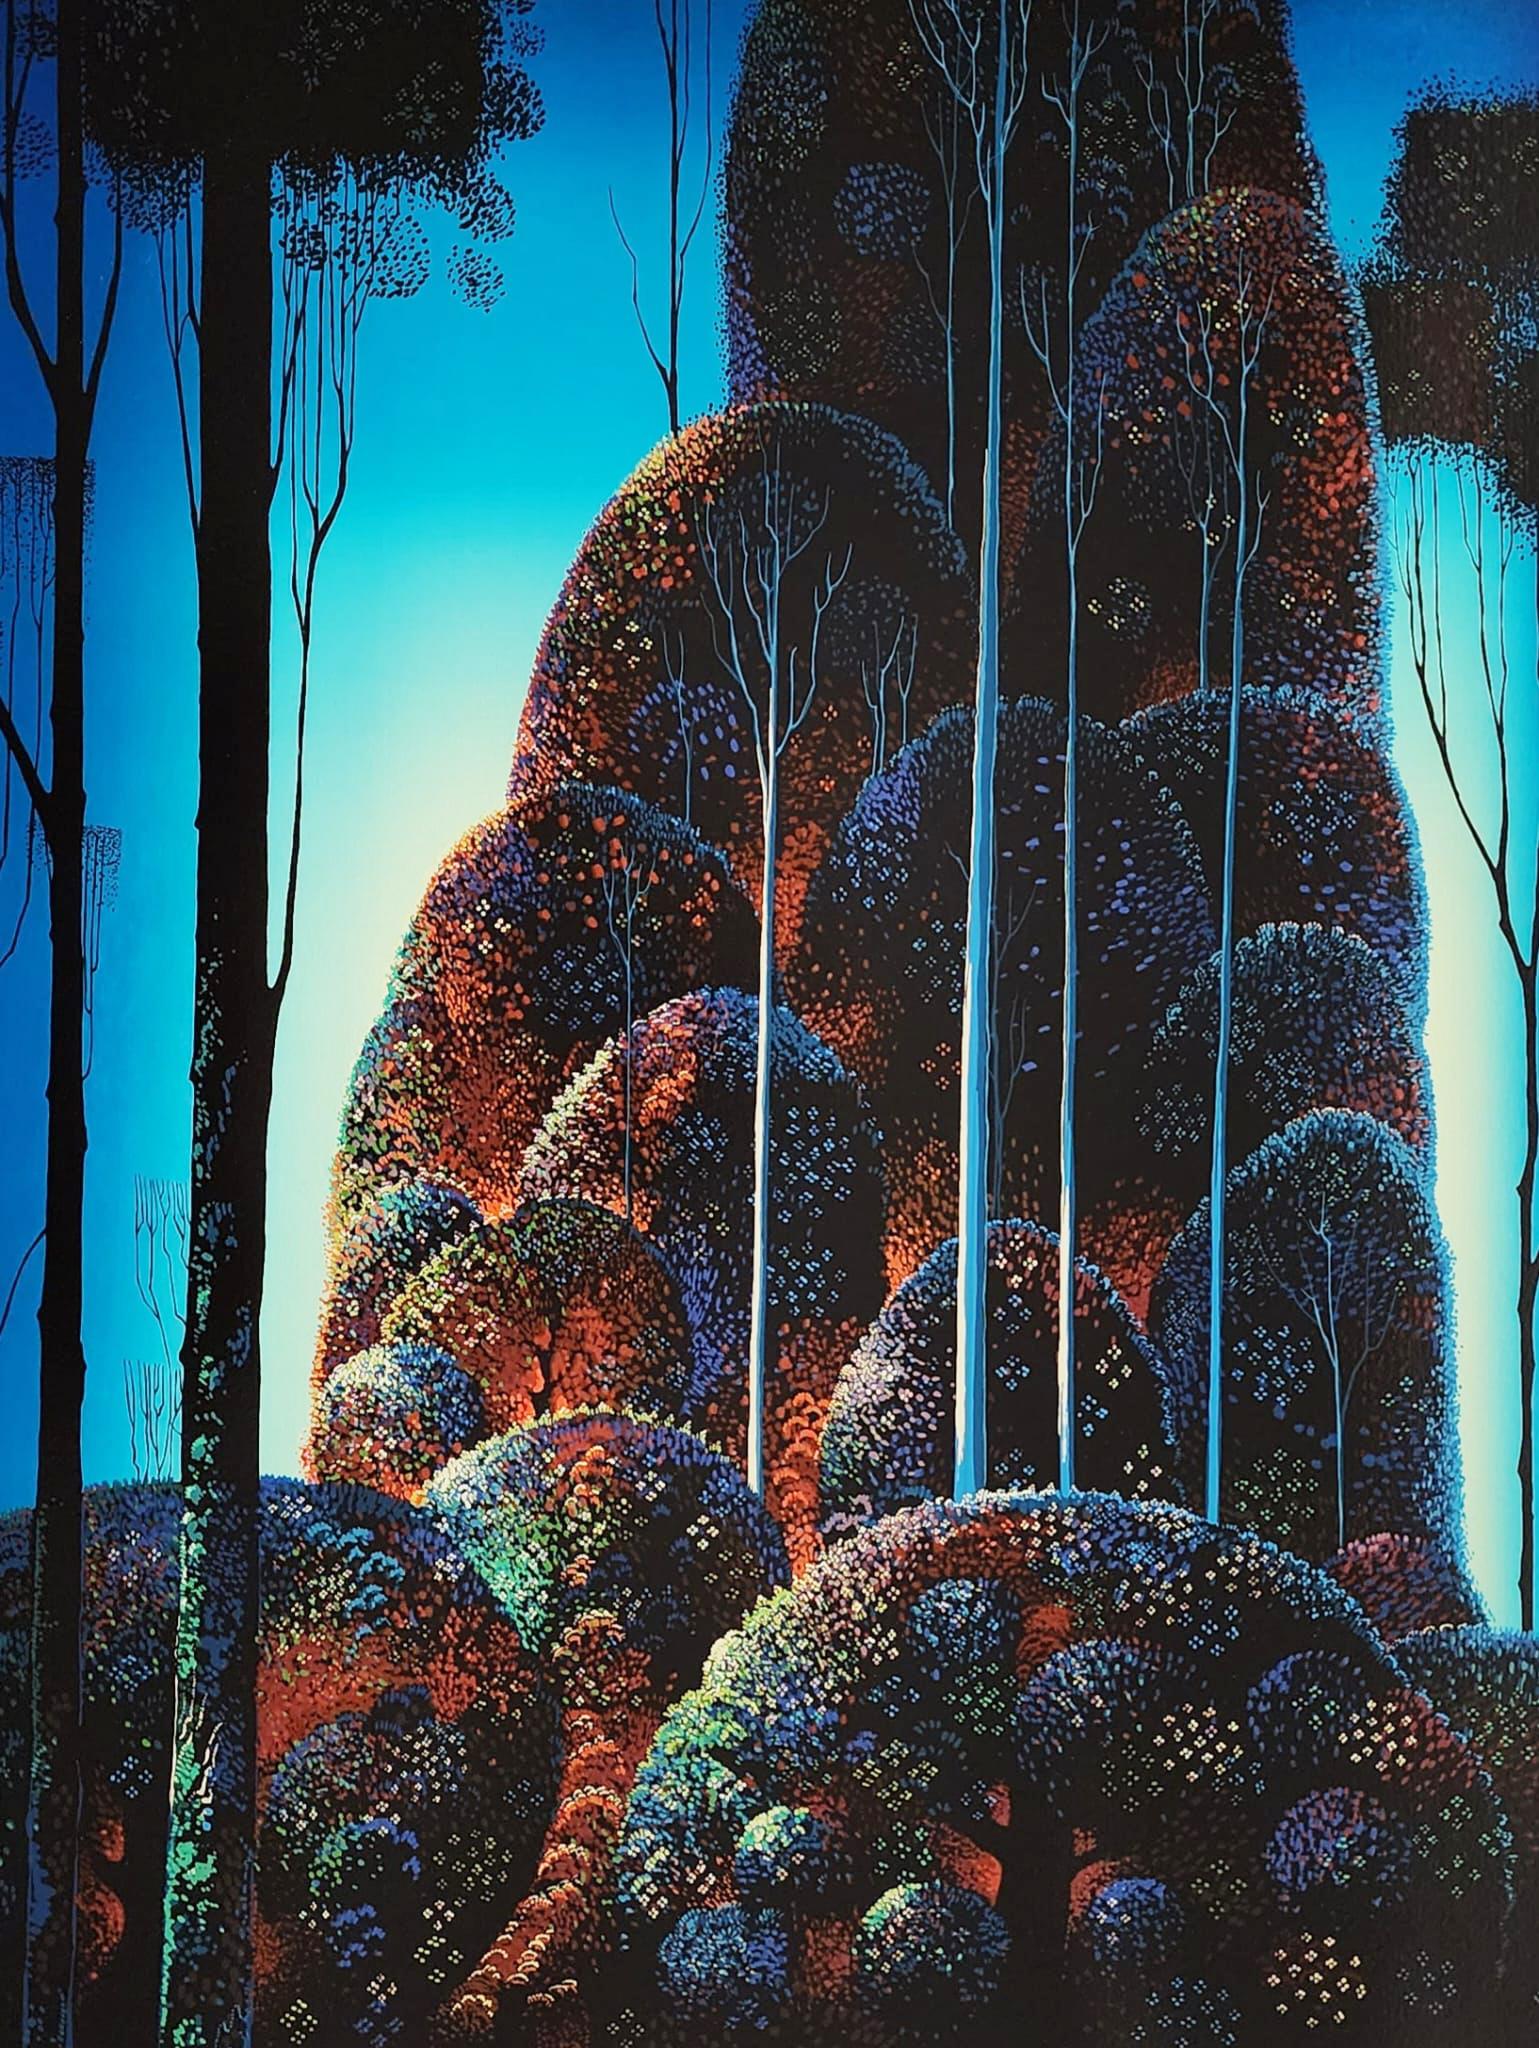 'TALL TREES' 1987 - Print by Eyvind Earle